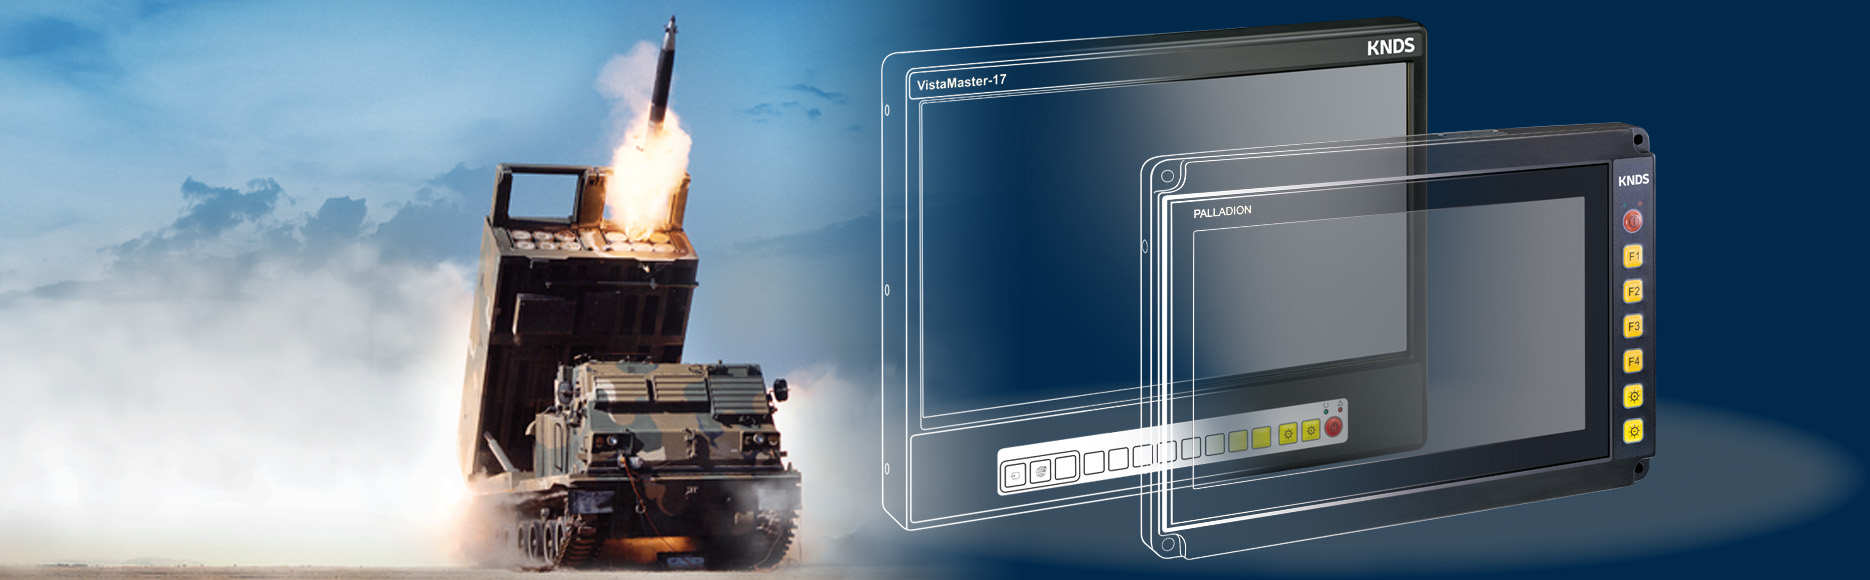 Rocket launcher system with rocket and panel PC systems from ATM